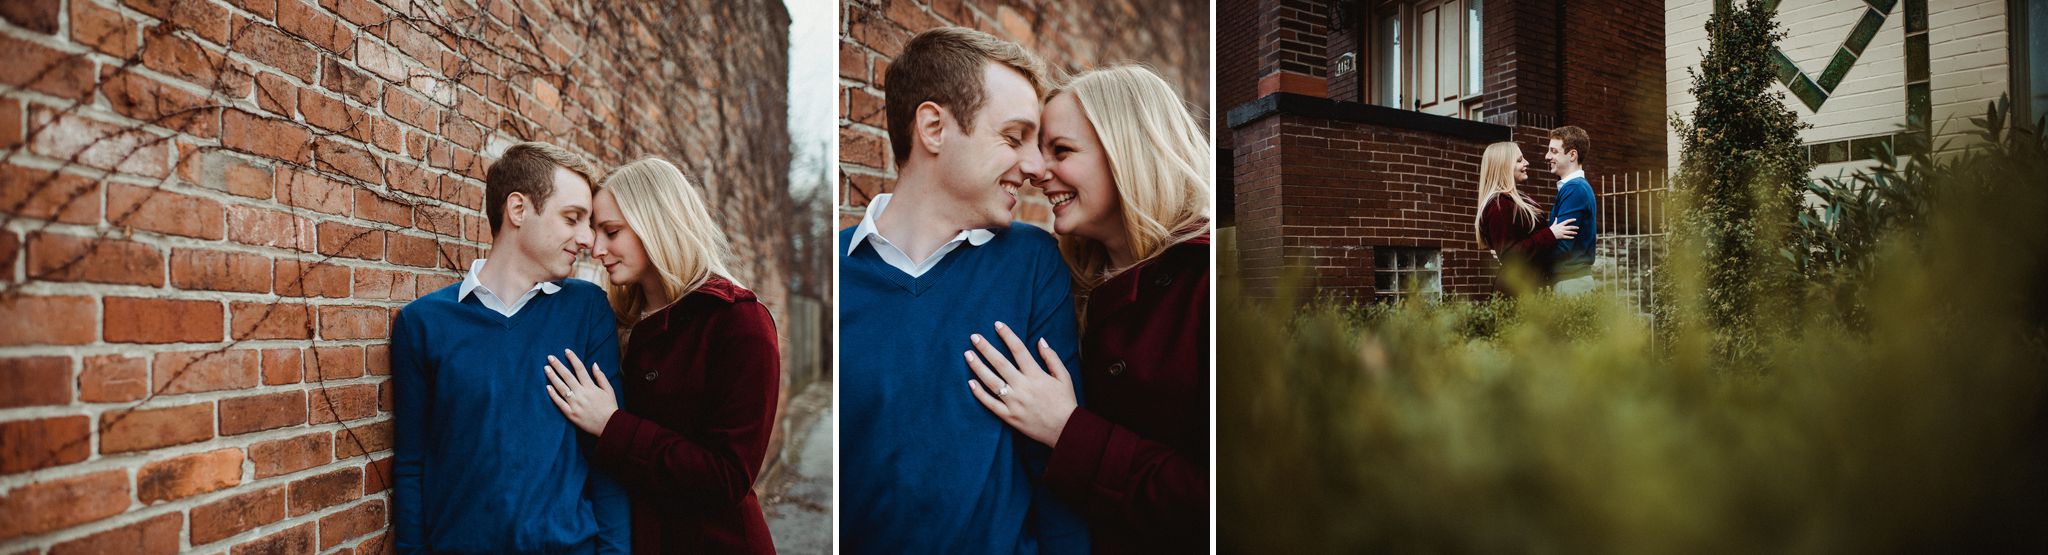 Engagement Session in the Grove